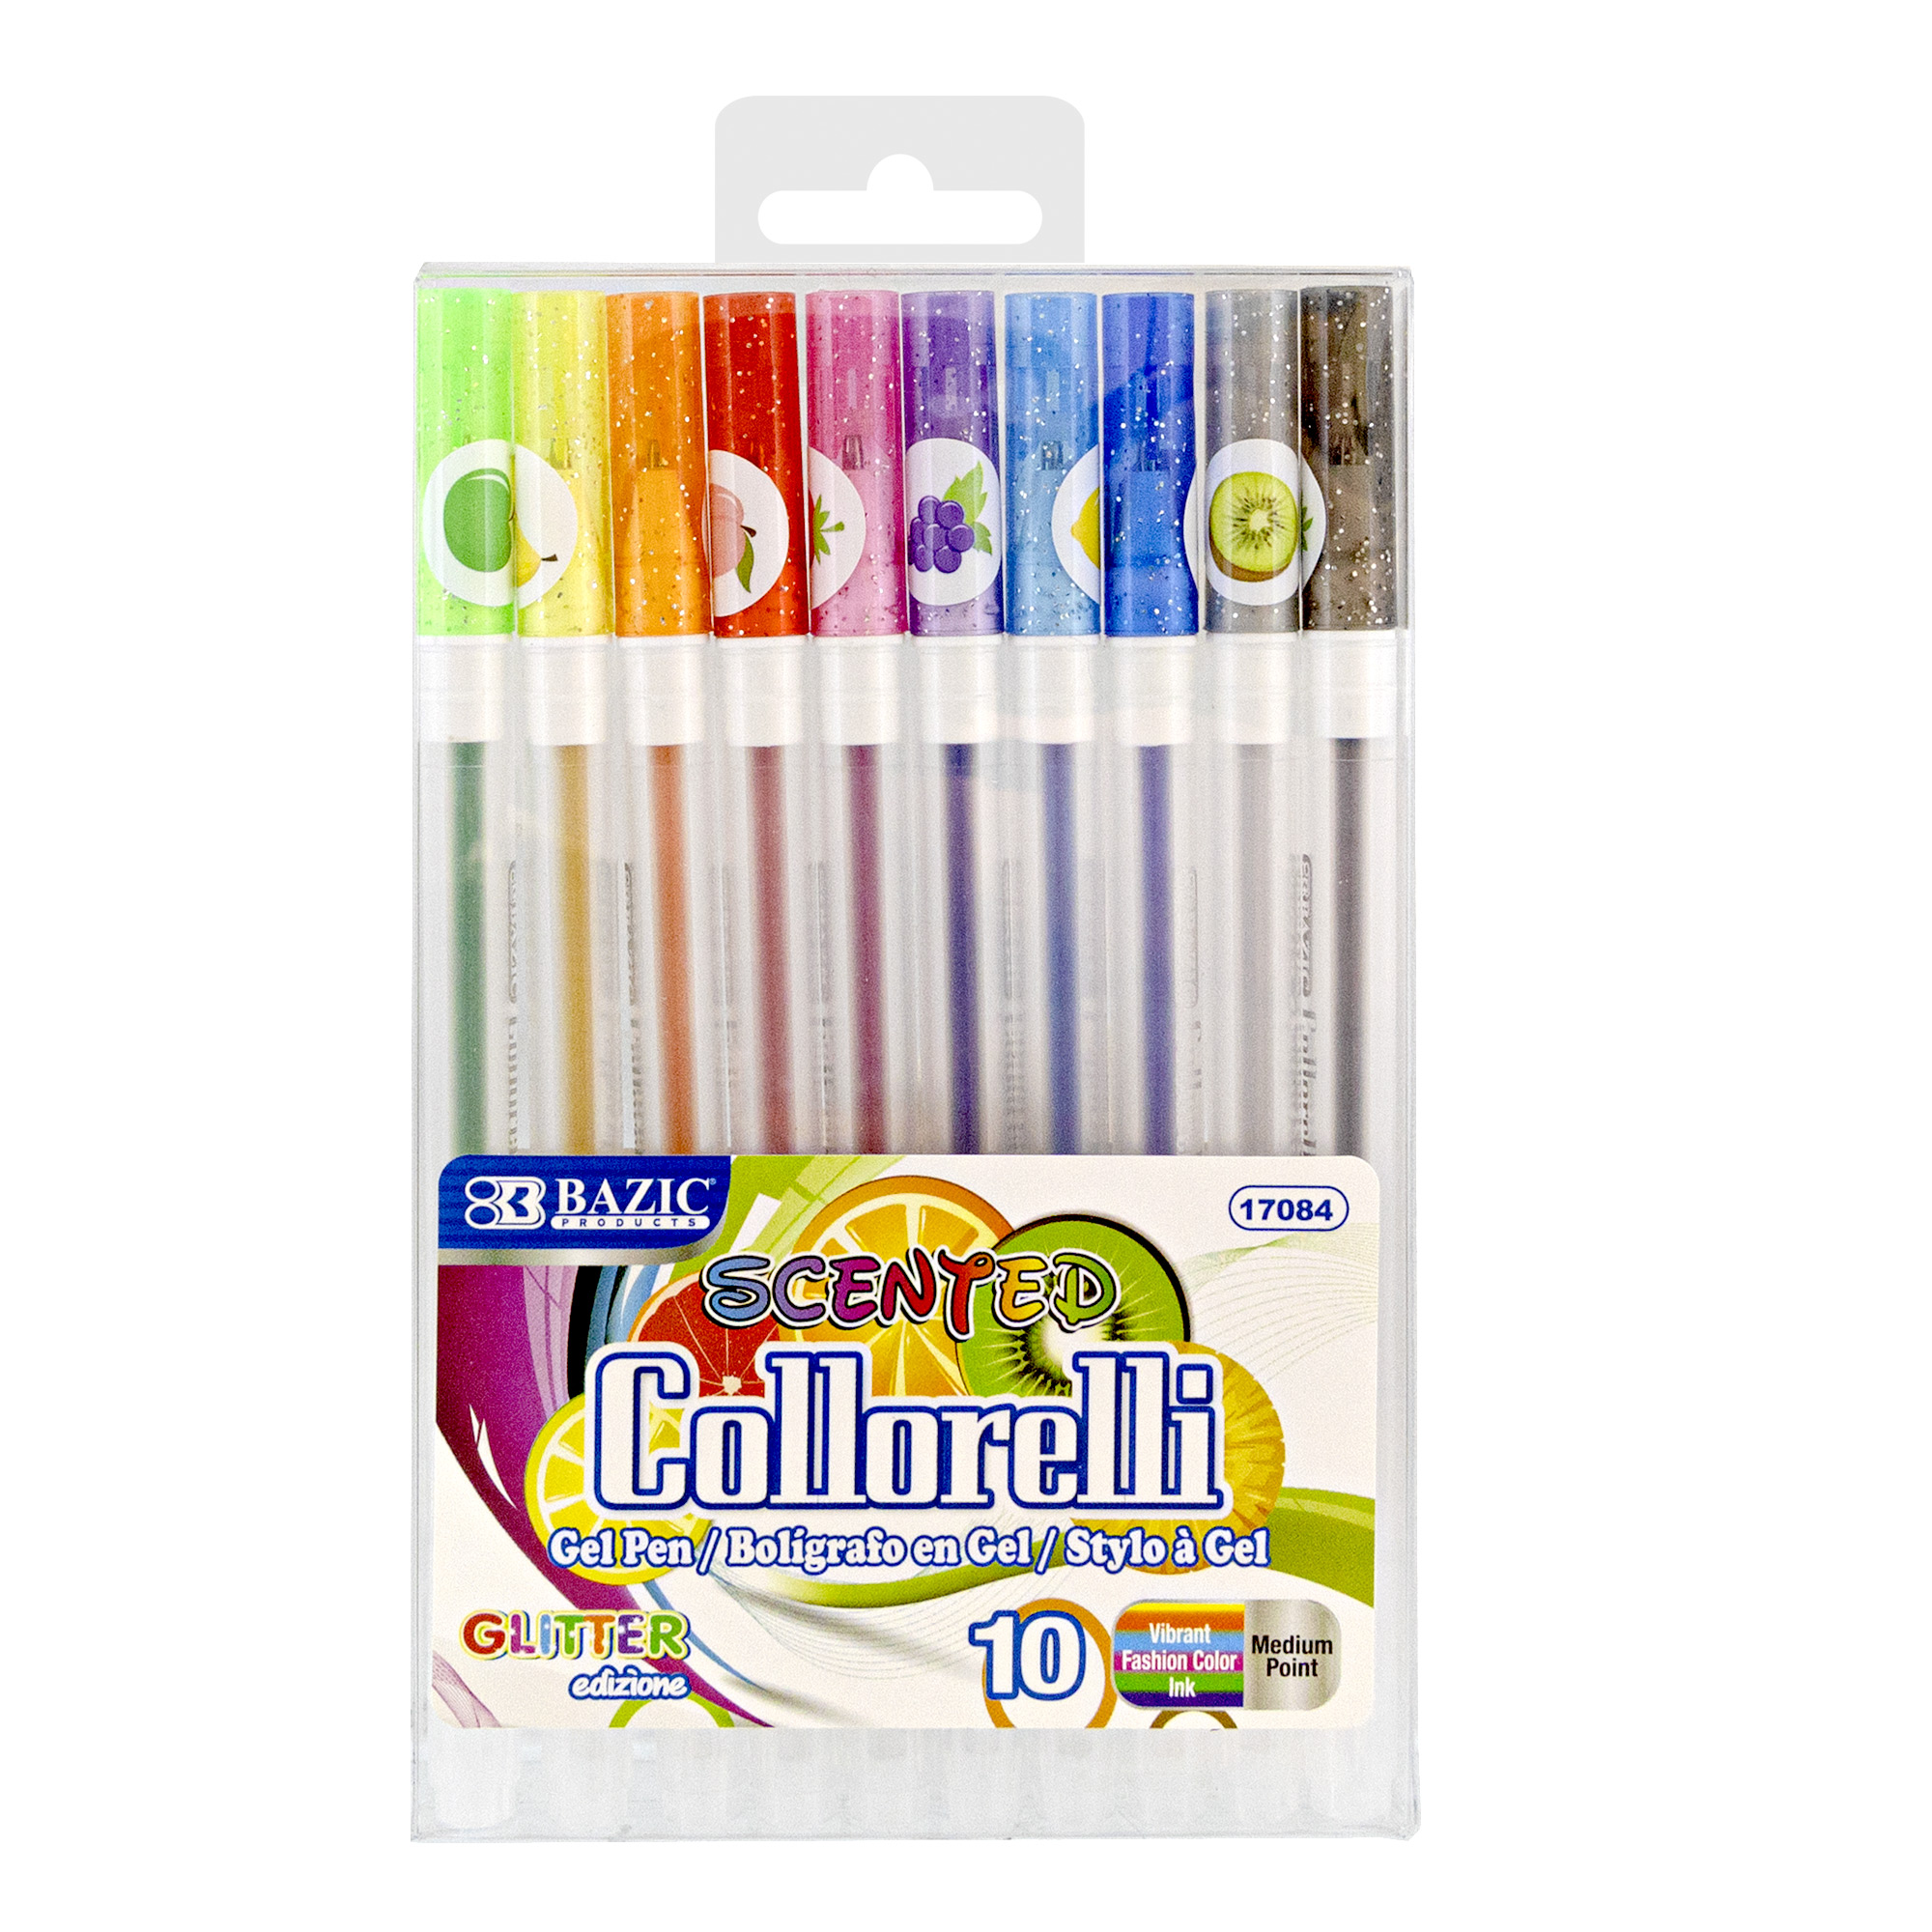 Color Spot Sparkle Gels 6 Glitter Gel Pens - Macanoco and Co.